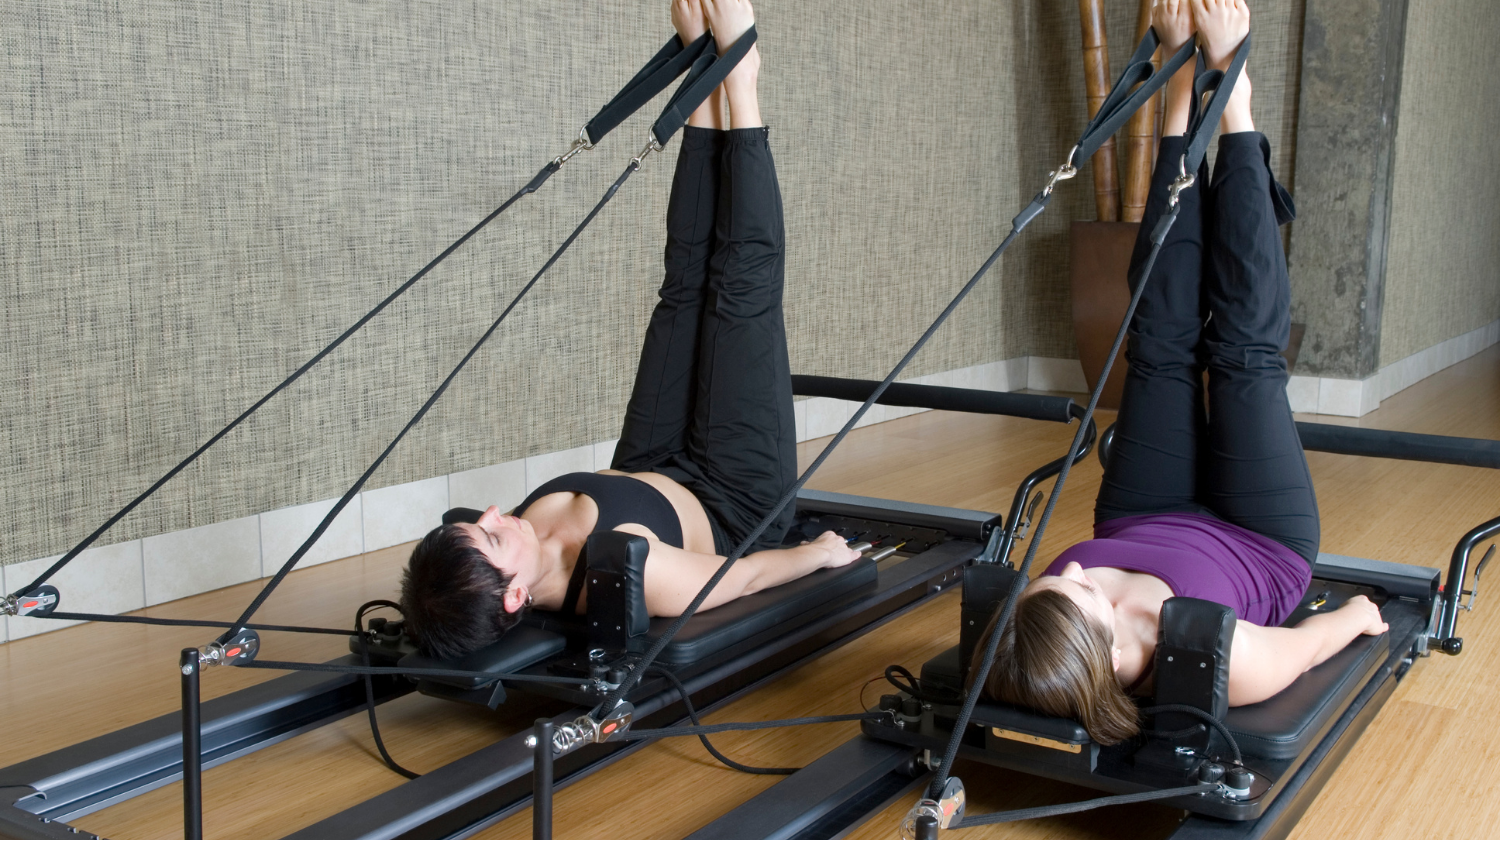 Pilates Reformer: How It Can Help Your Workout